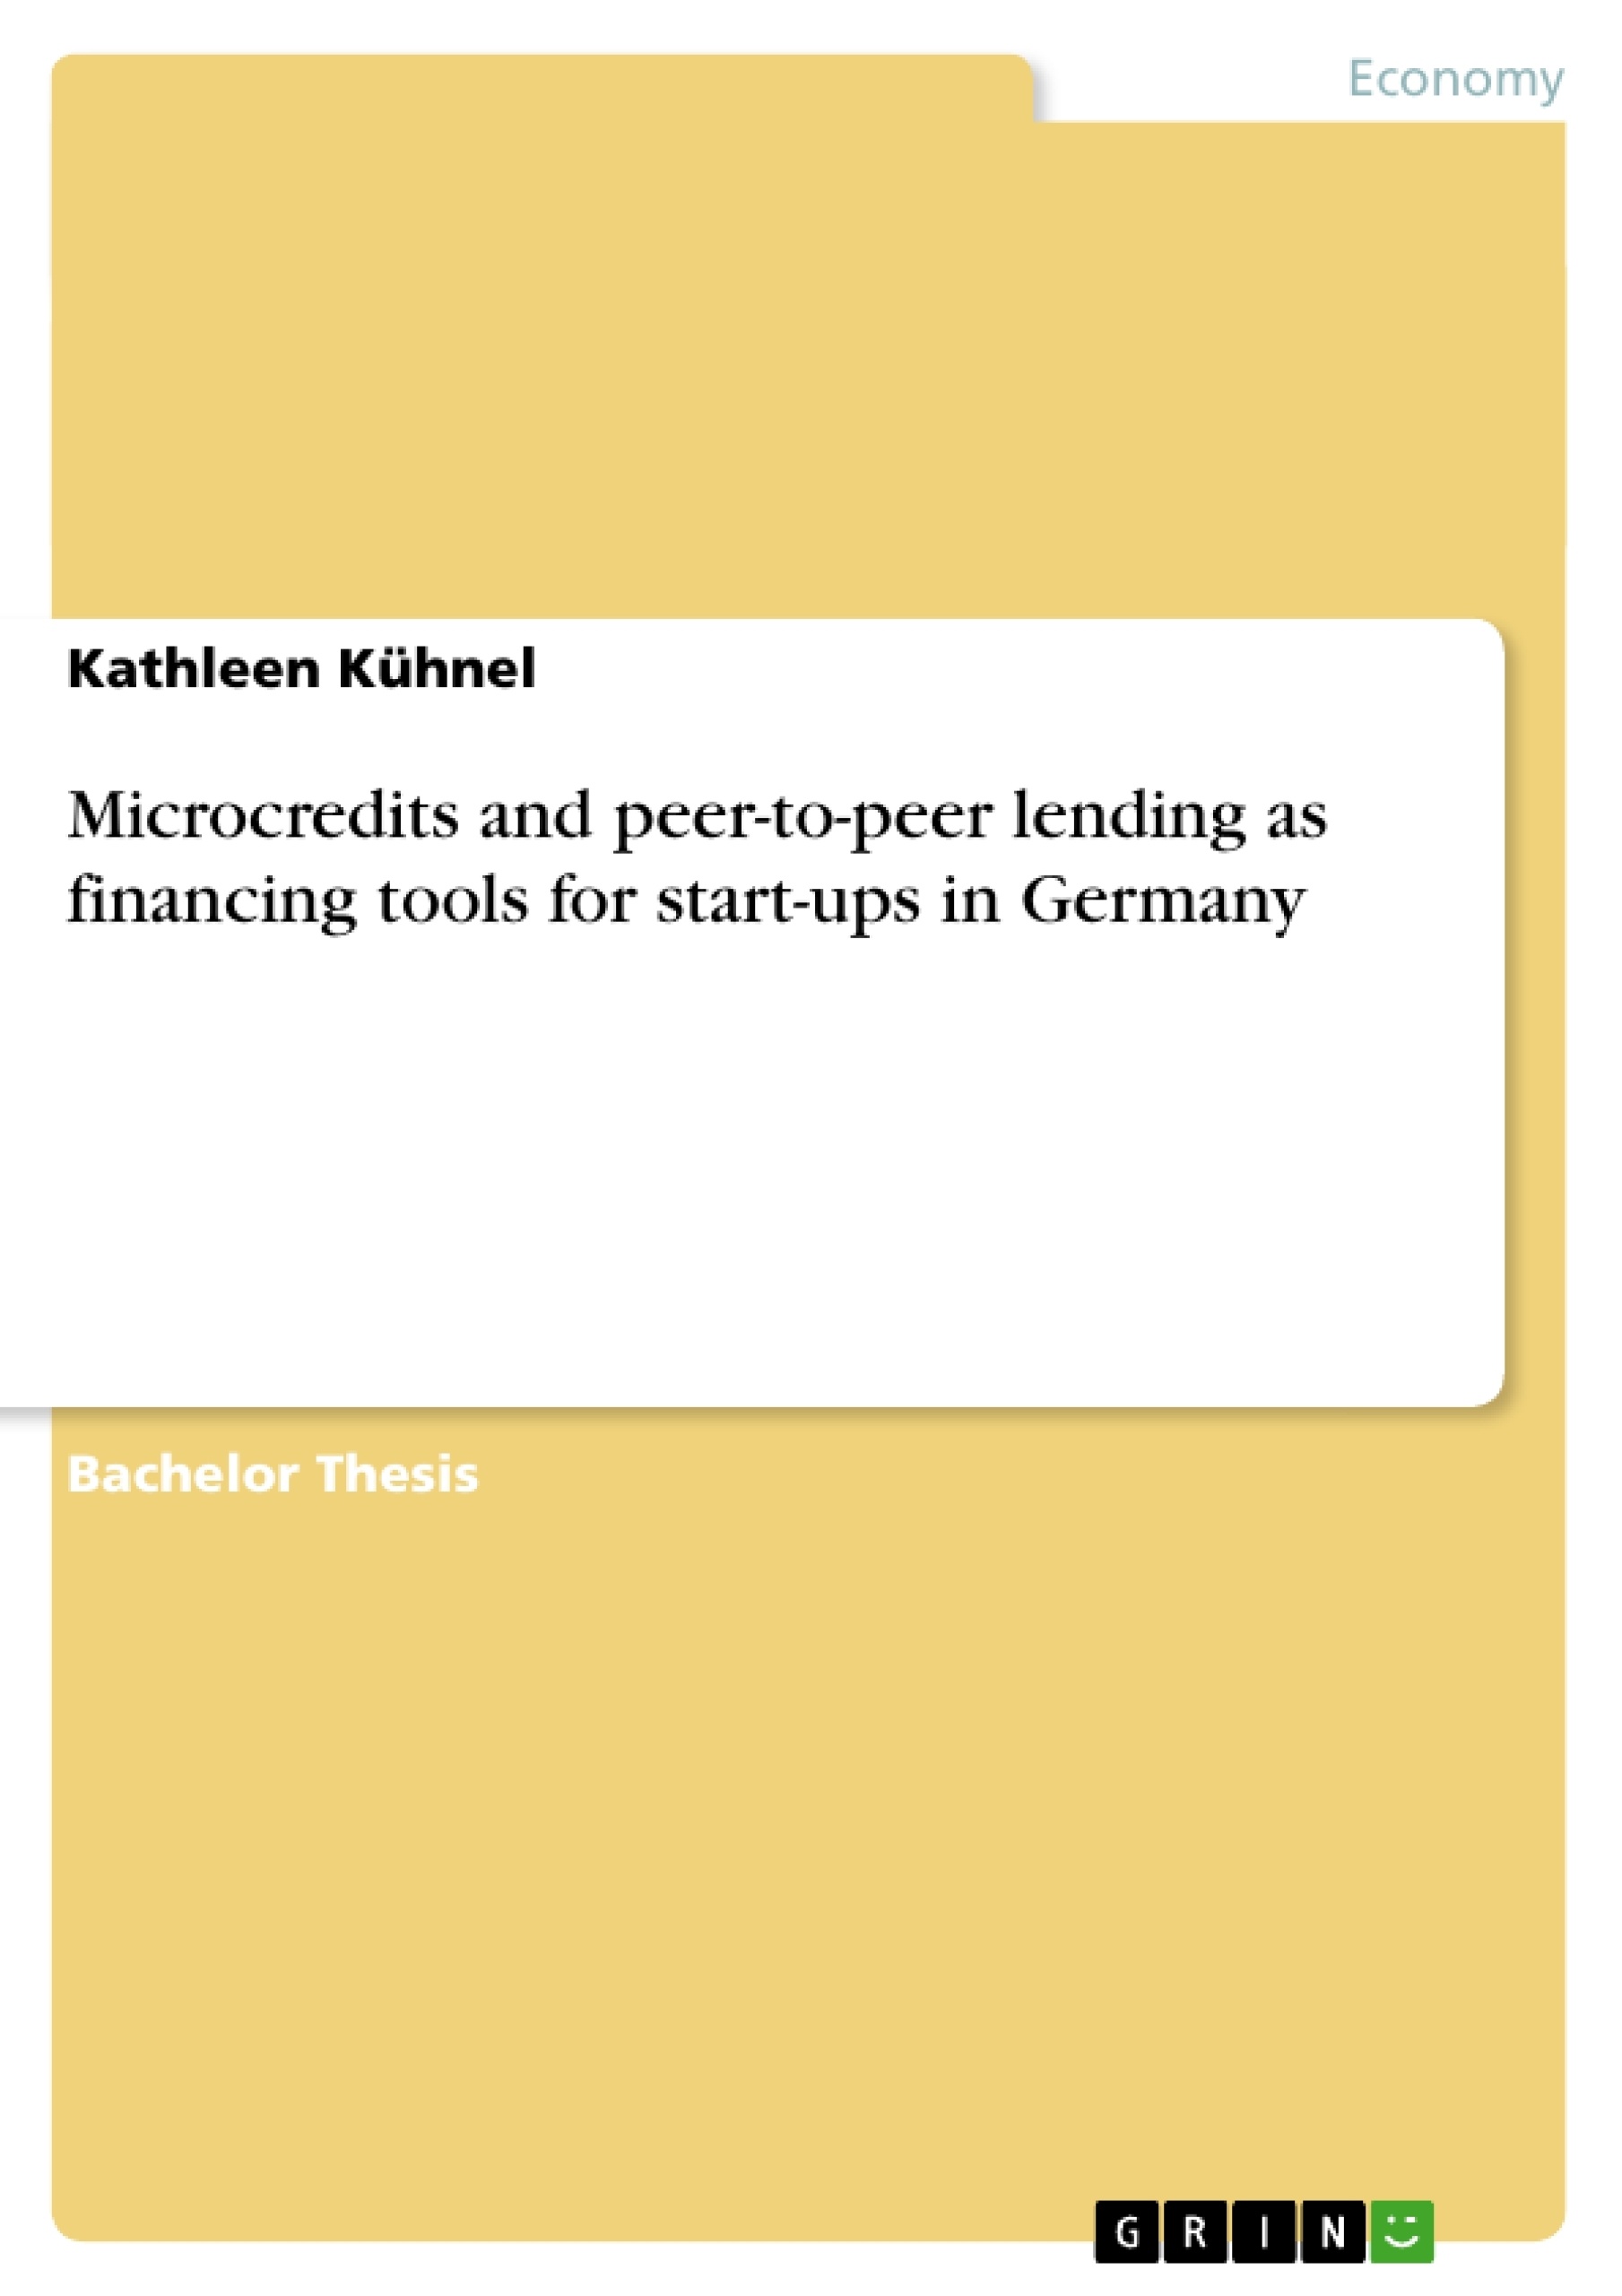 Titre: Microcredits and peer-to-peer lending as financing tools for start-ups in Germany